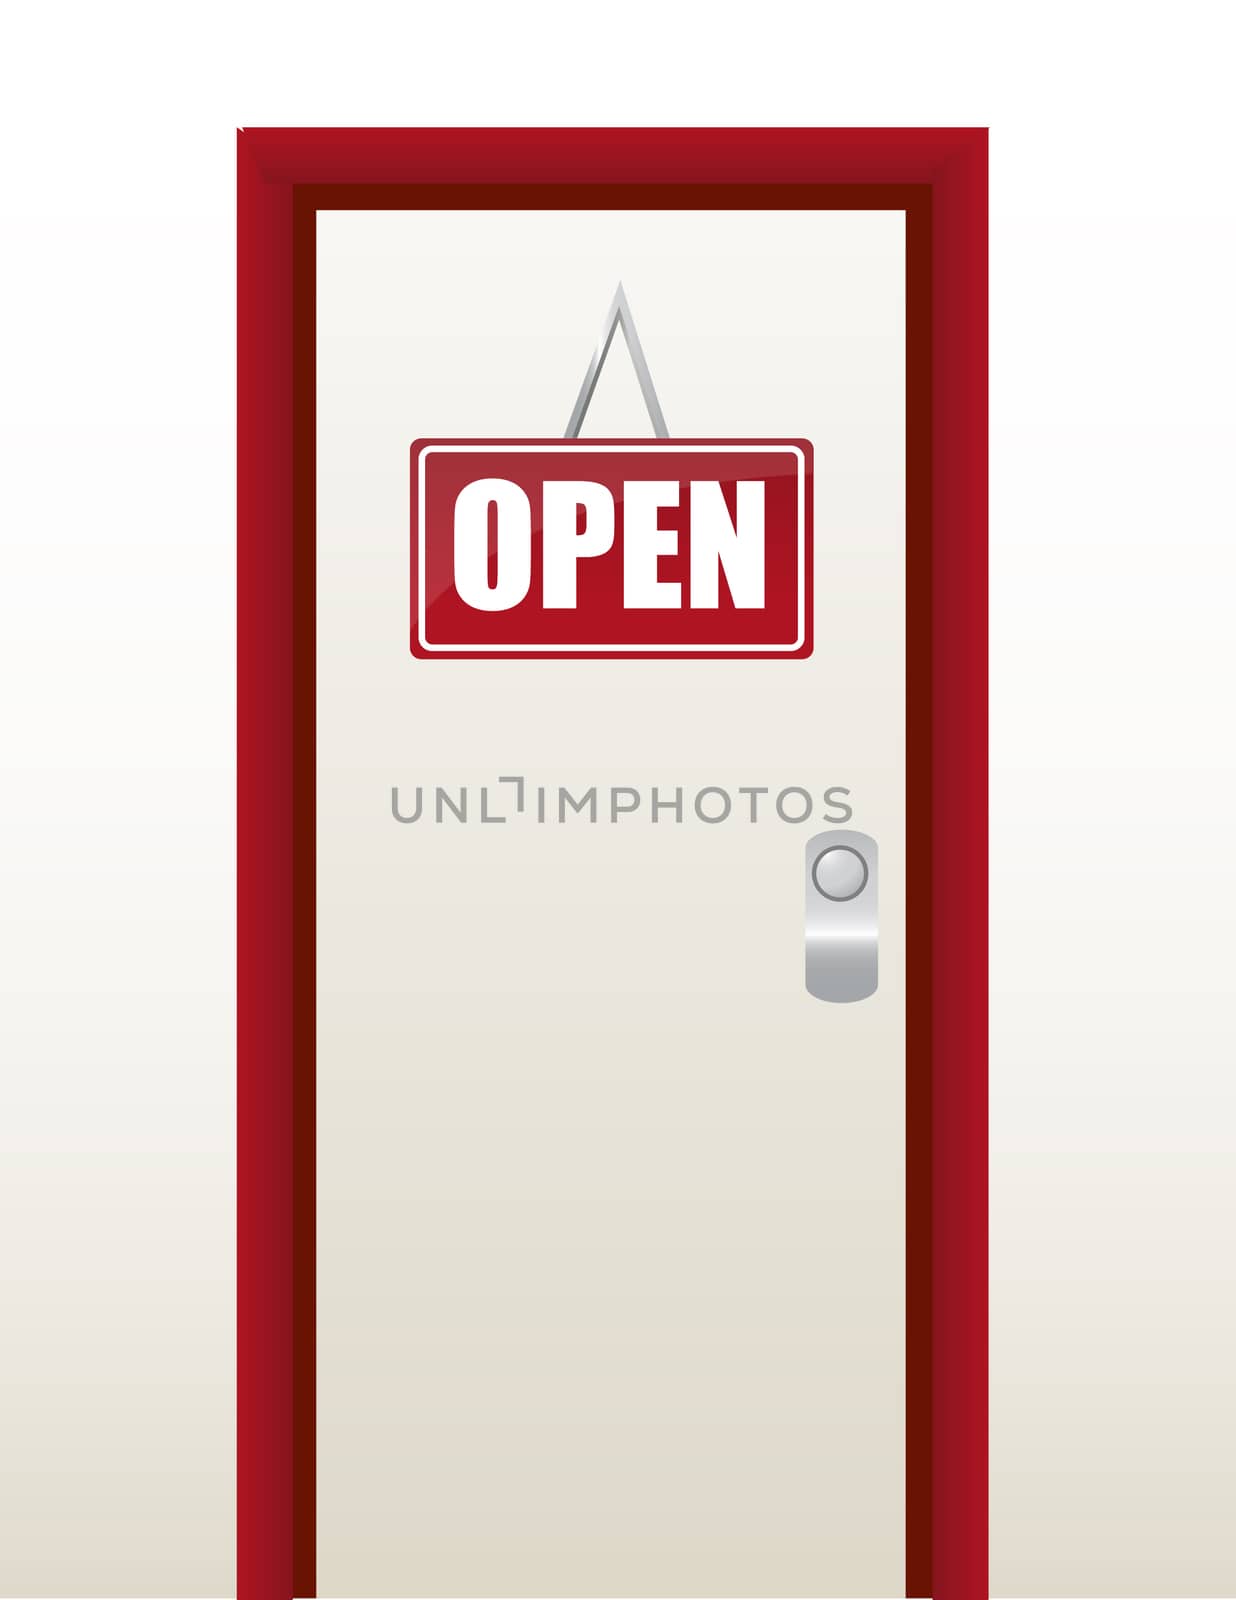 Red and white open sign illustration design by alexmillos